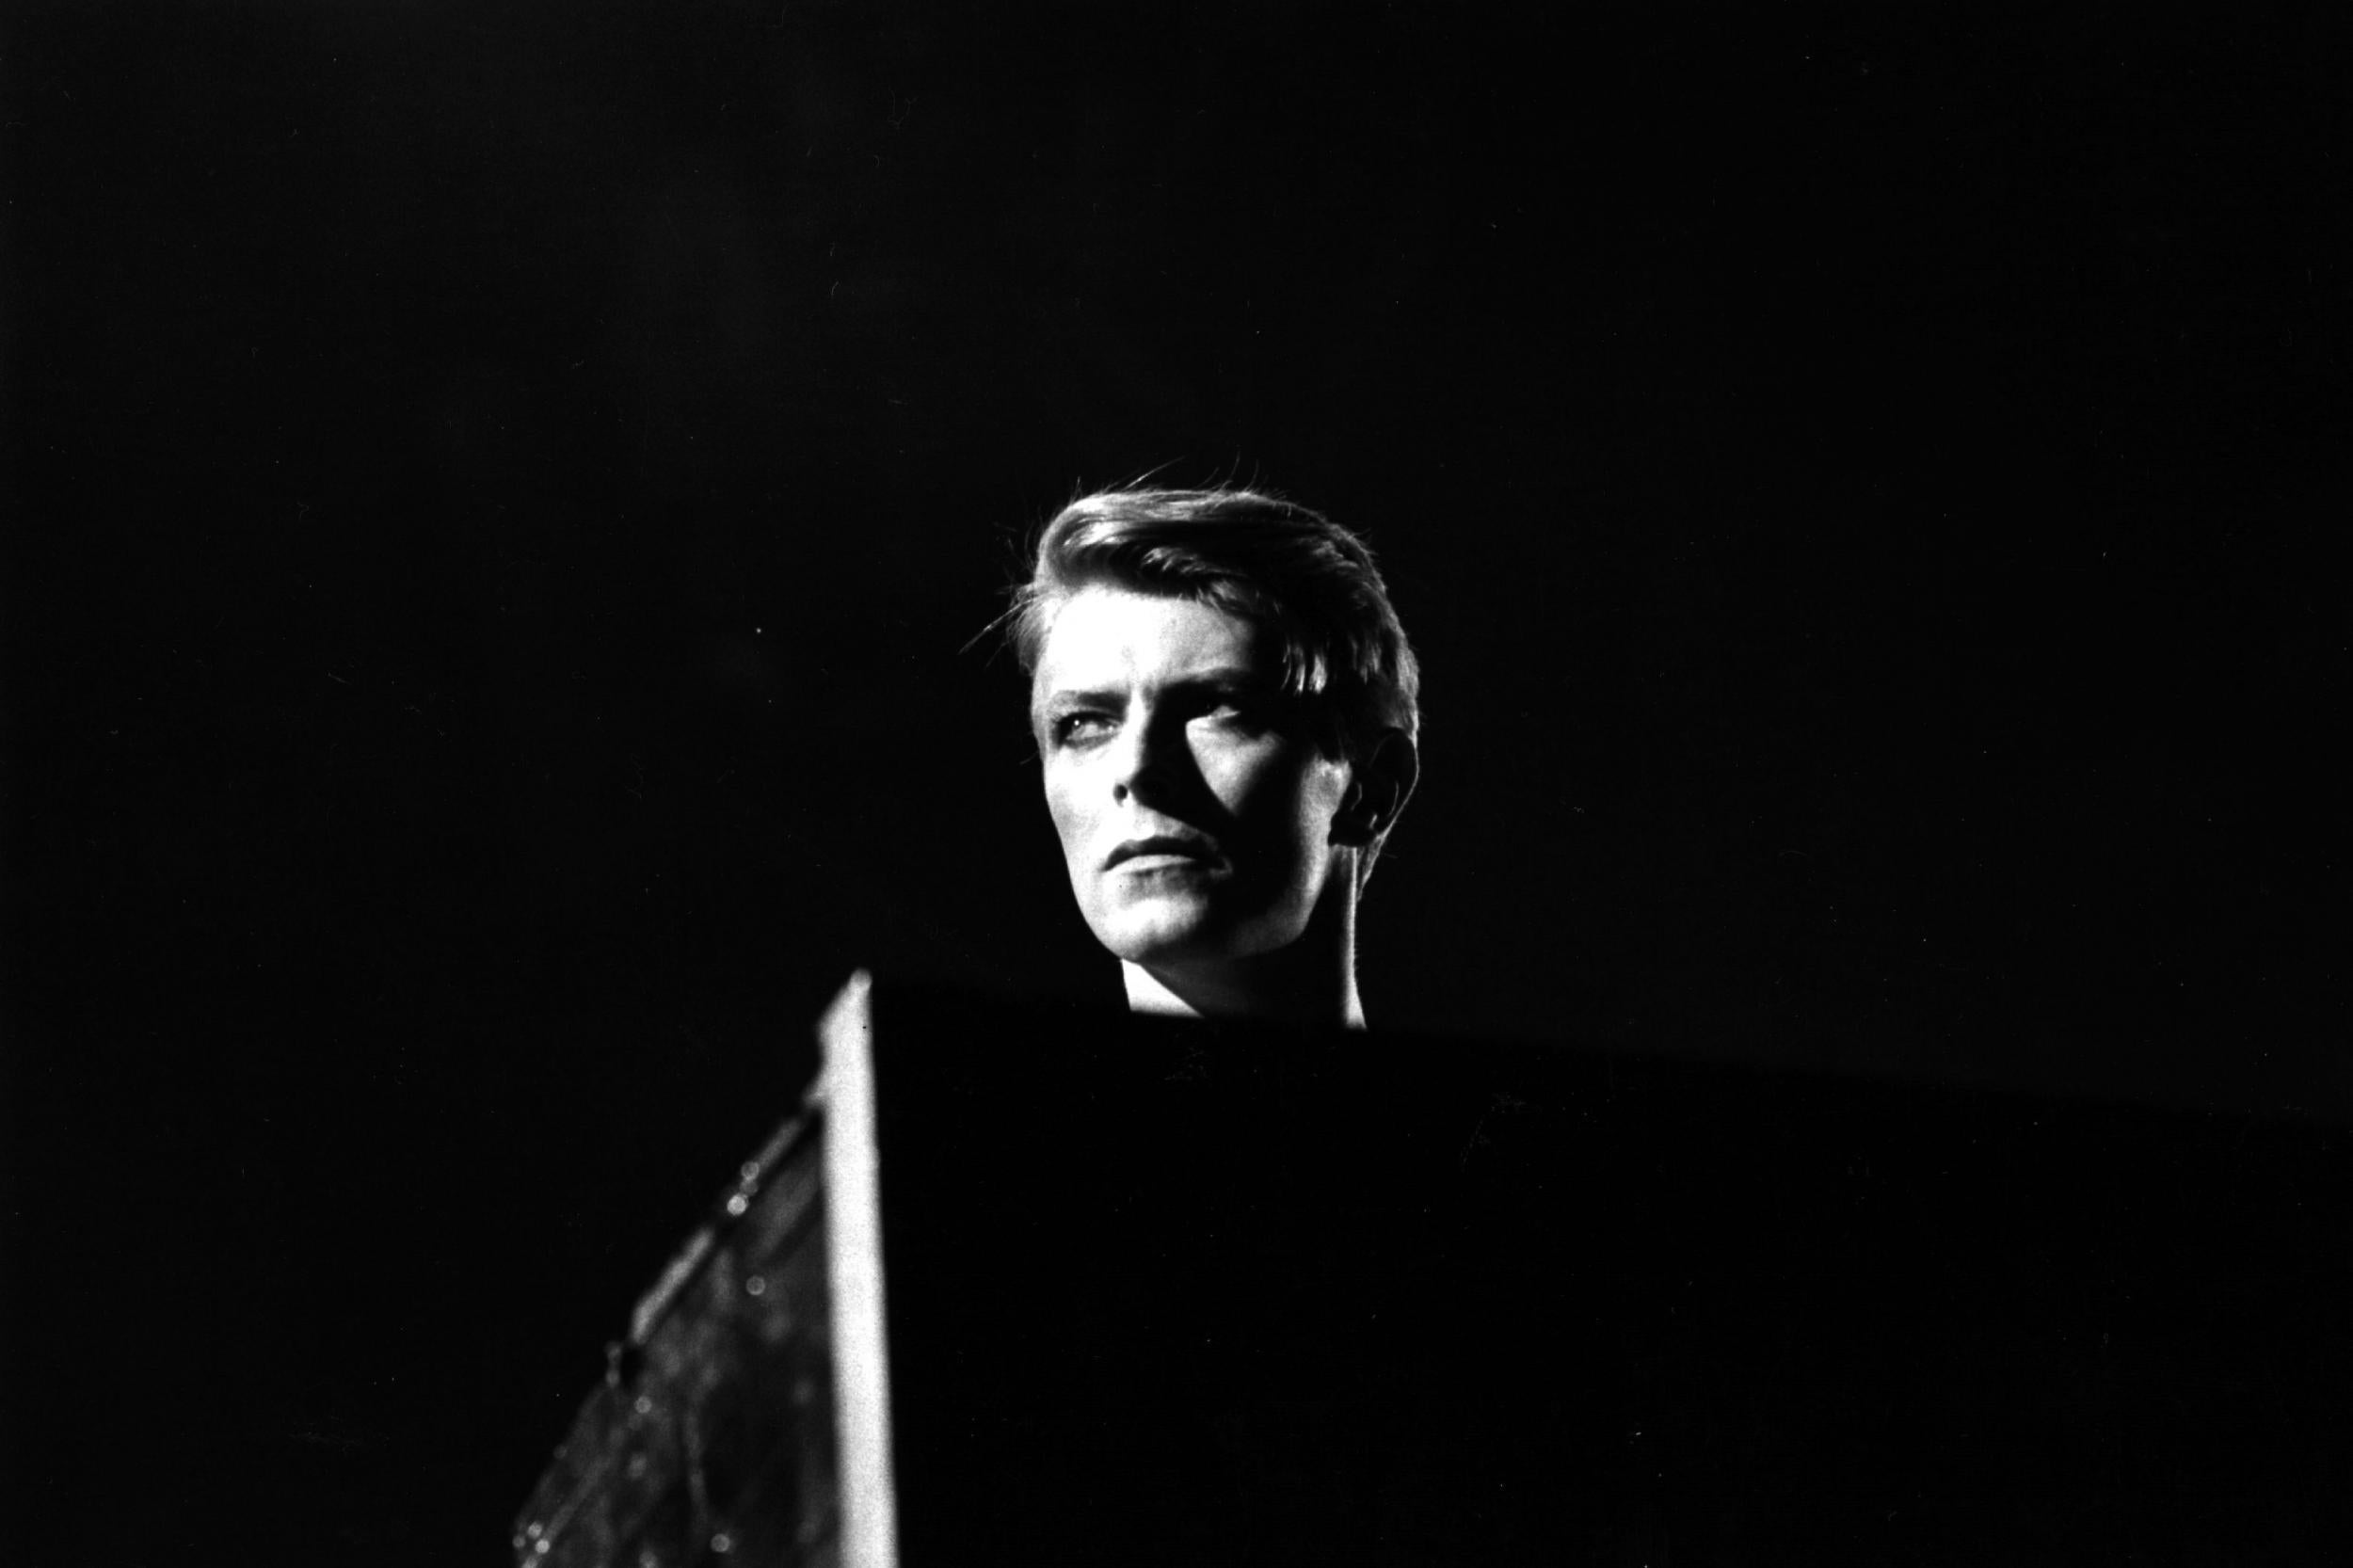 Bowie in concert at Earl’s Court, London, during his 1978 world tour